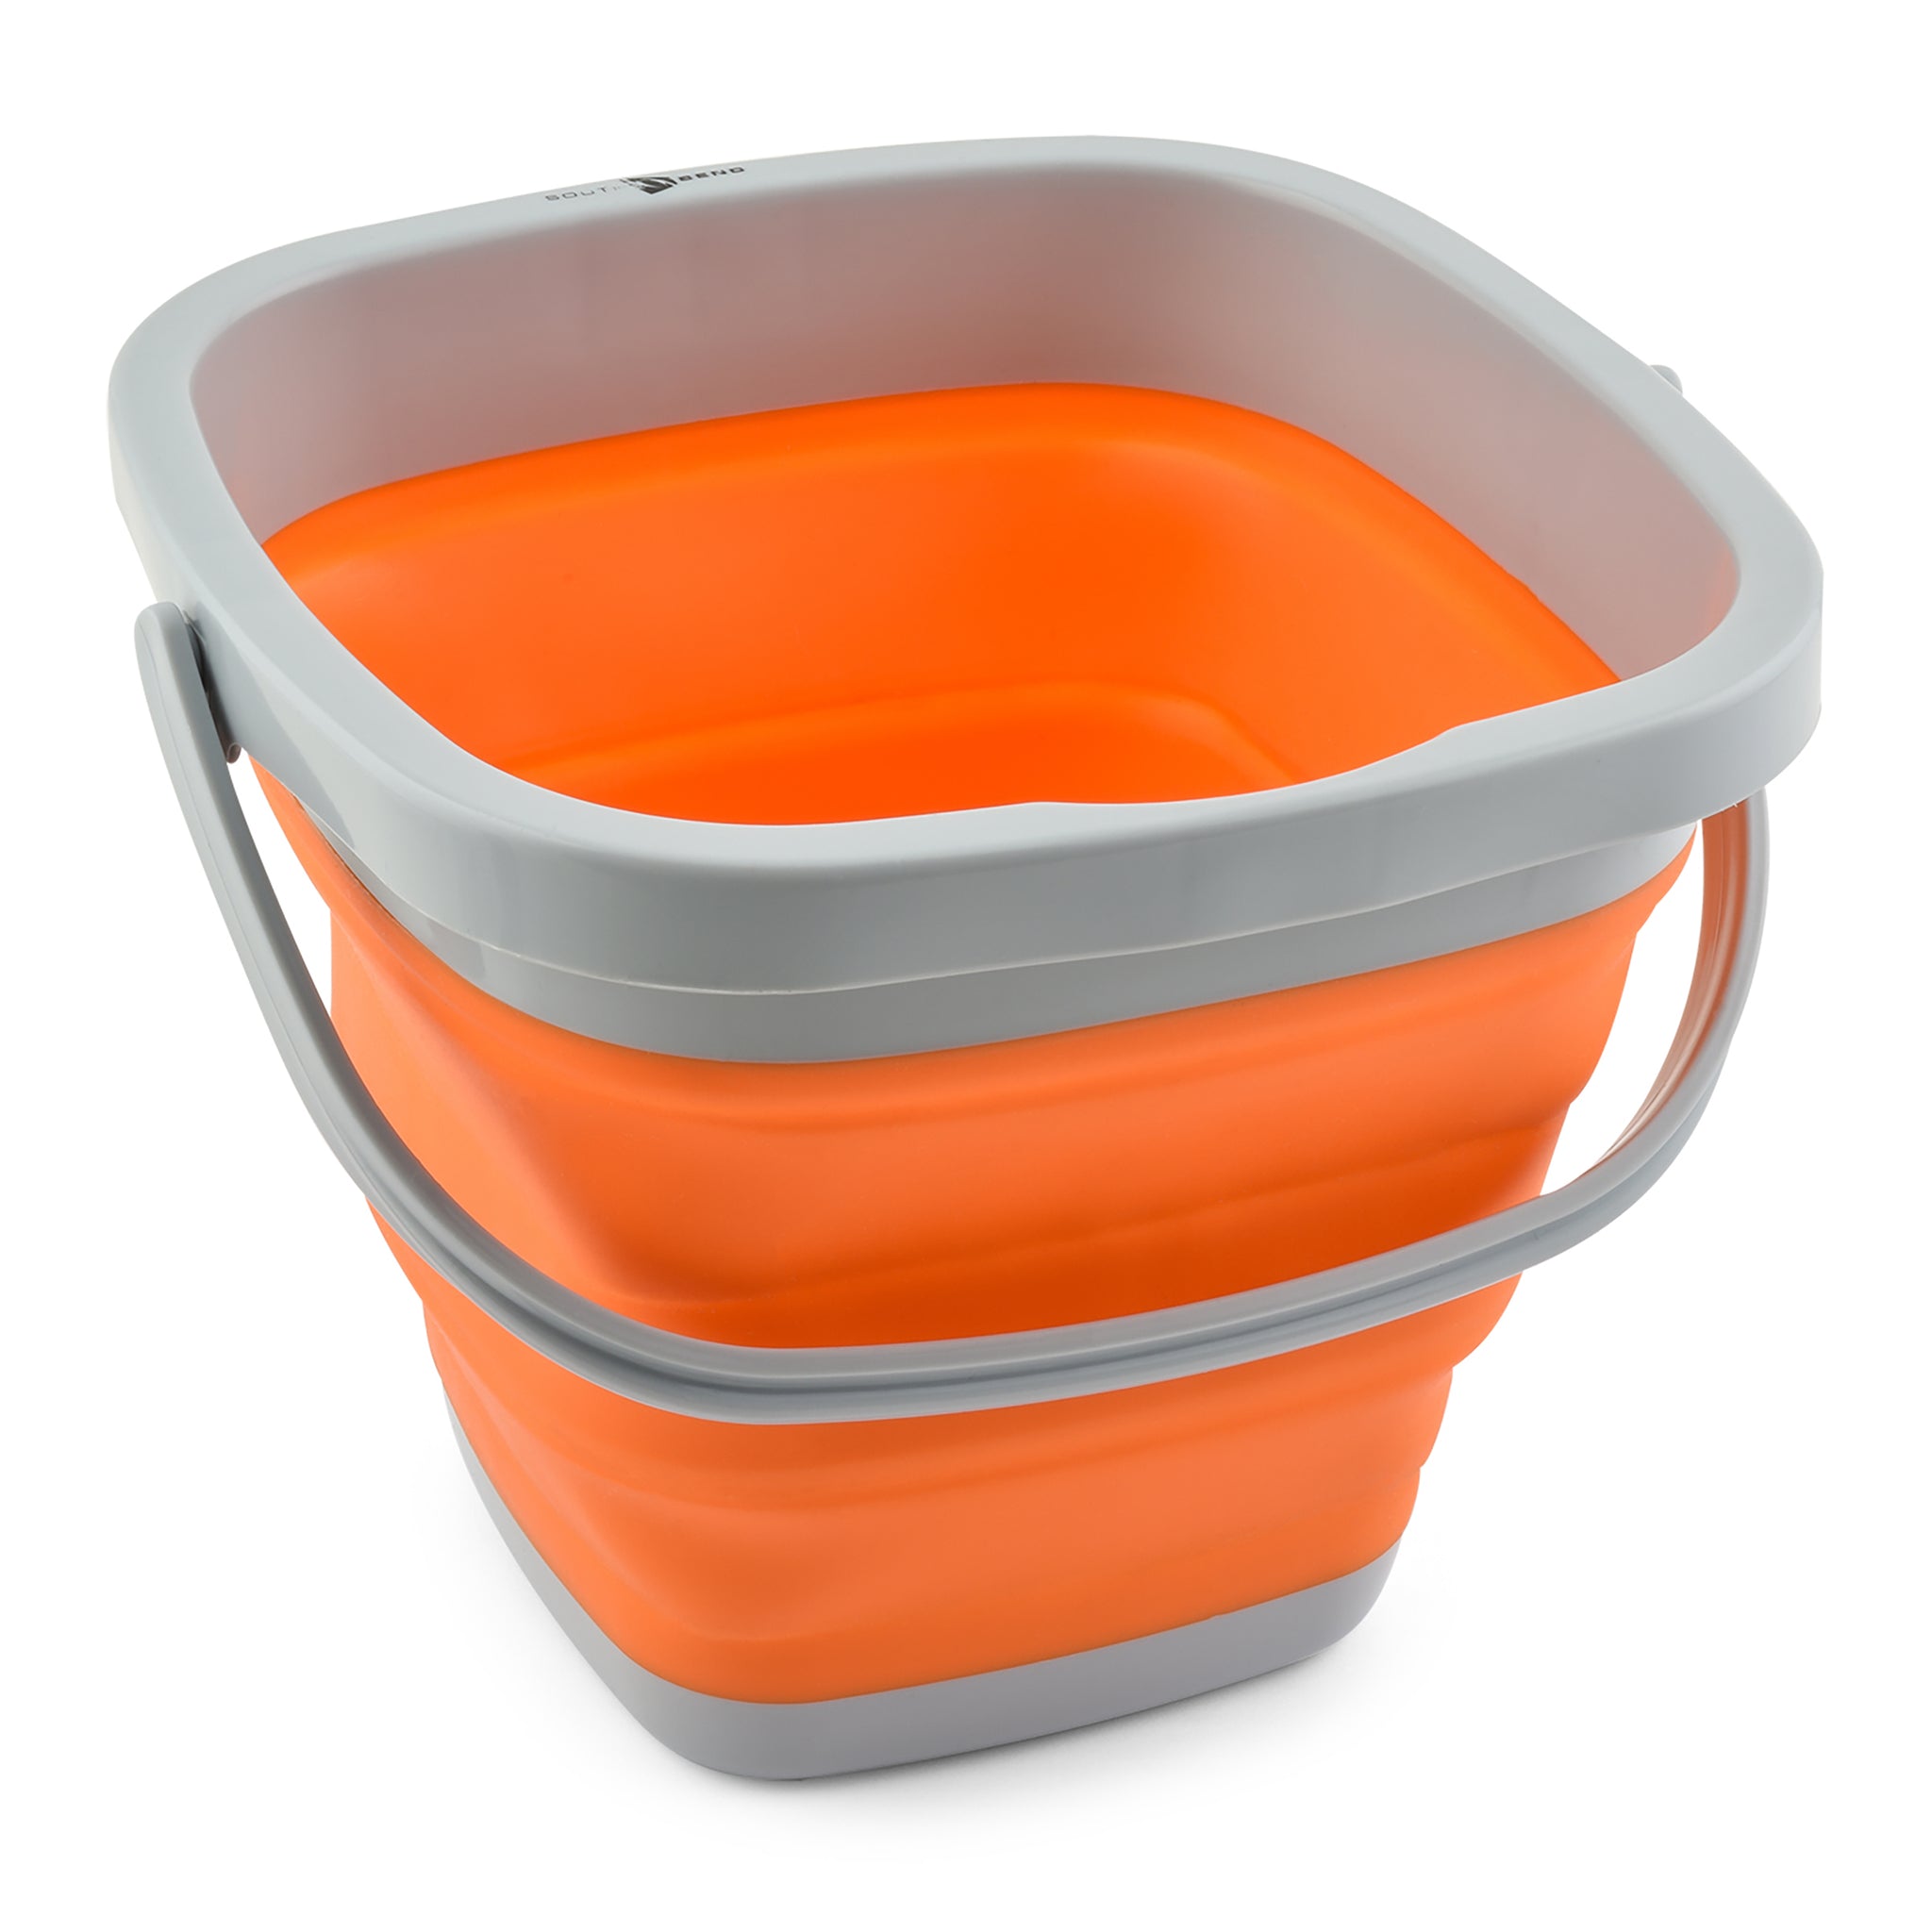  SOUTH BEND Collapsible Bait Bucket – Easy Bait